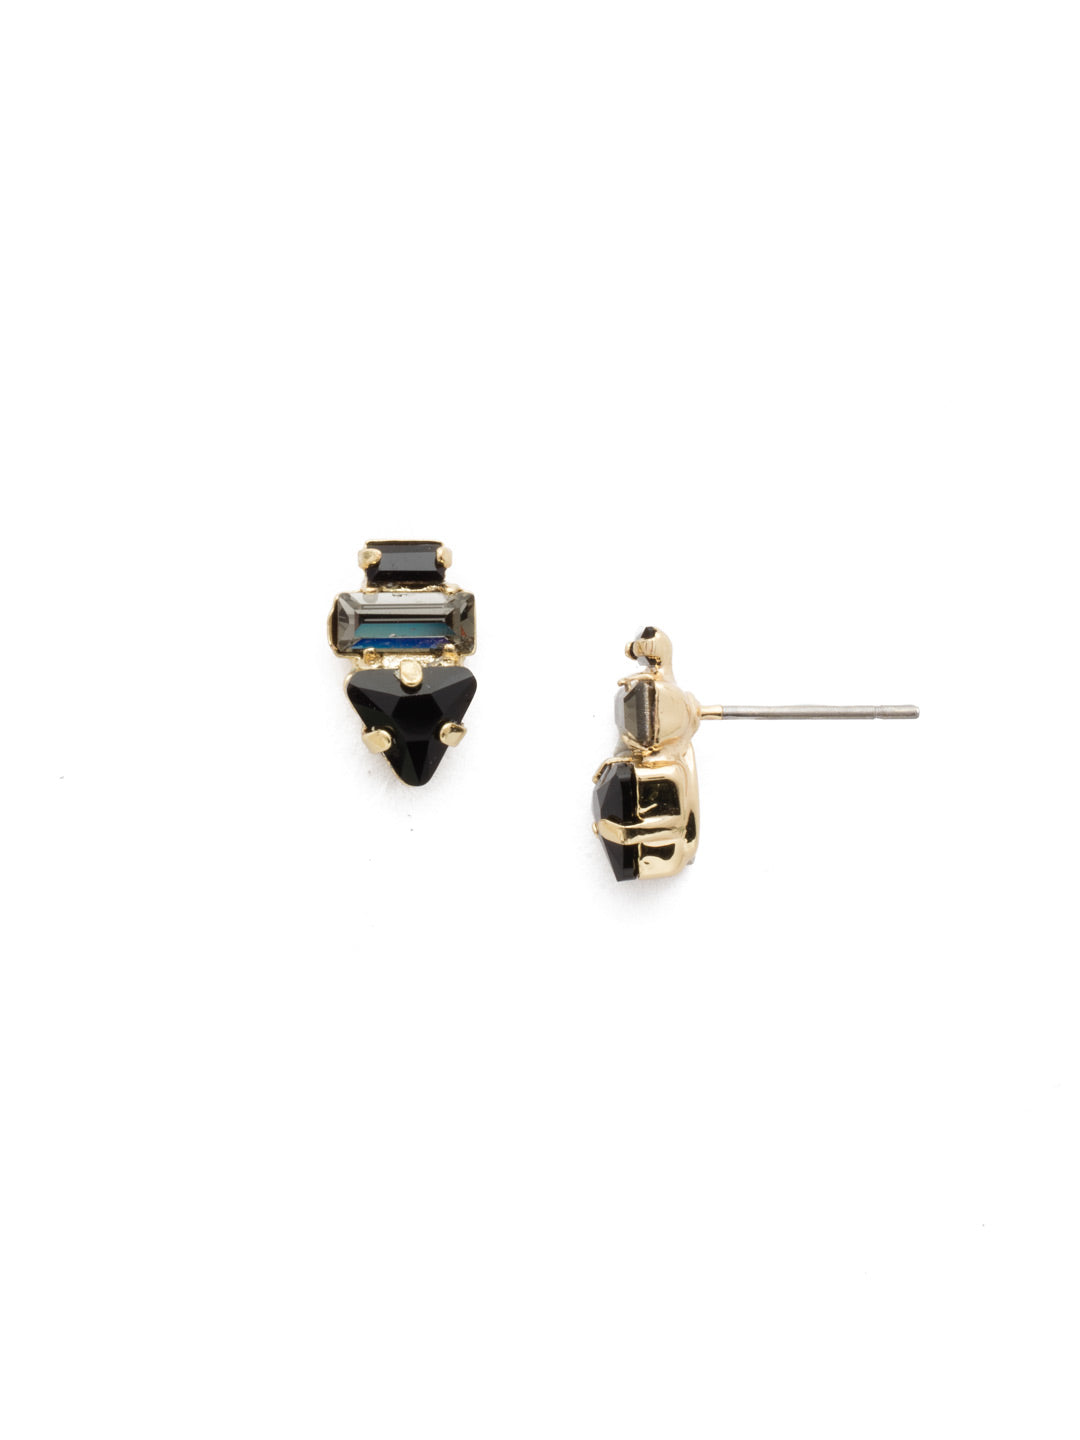 Triple Stack Stud Earrings - EDN104BGJET - <p>A triangular crystal rests below two baguettes in this style that gets right to the point. From Sorrelli's Jet collection in our Bright Gold-tone finish.</p>